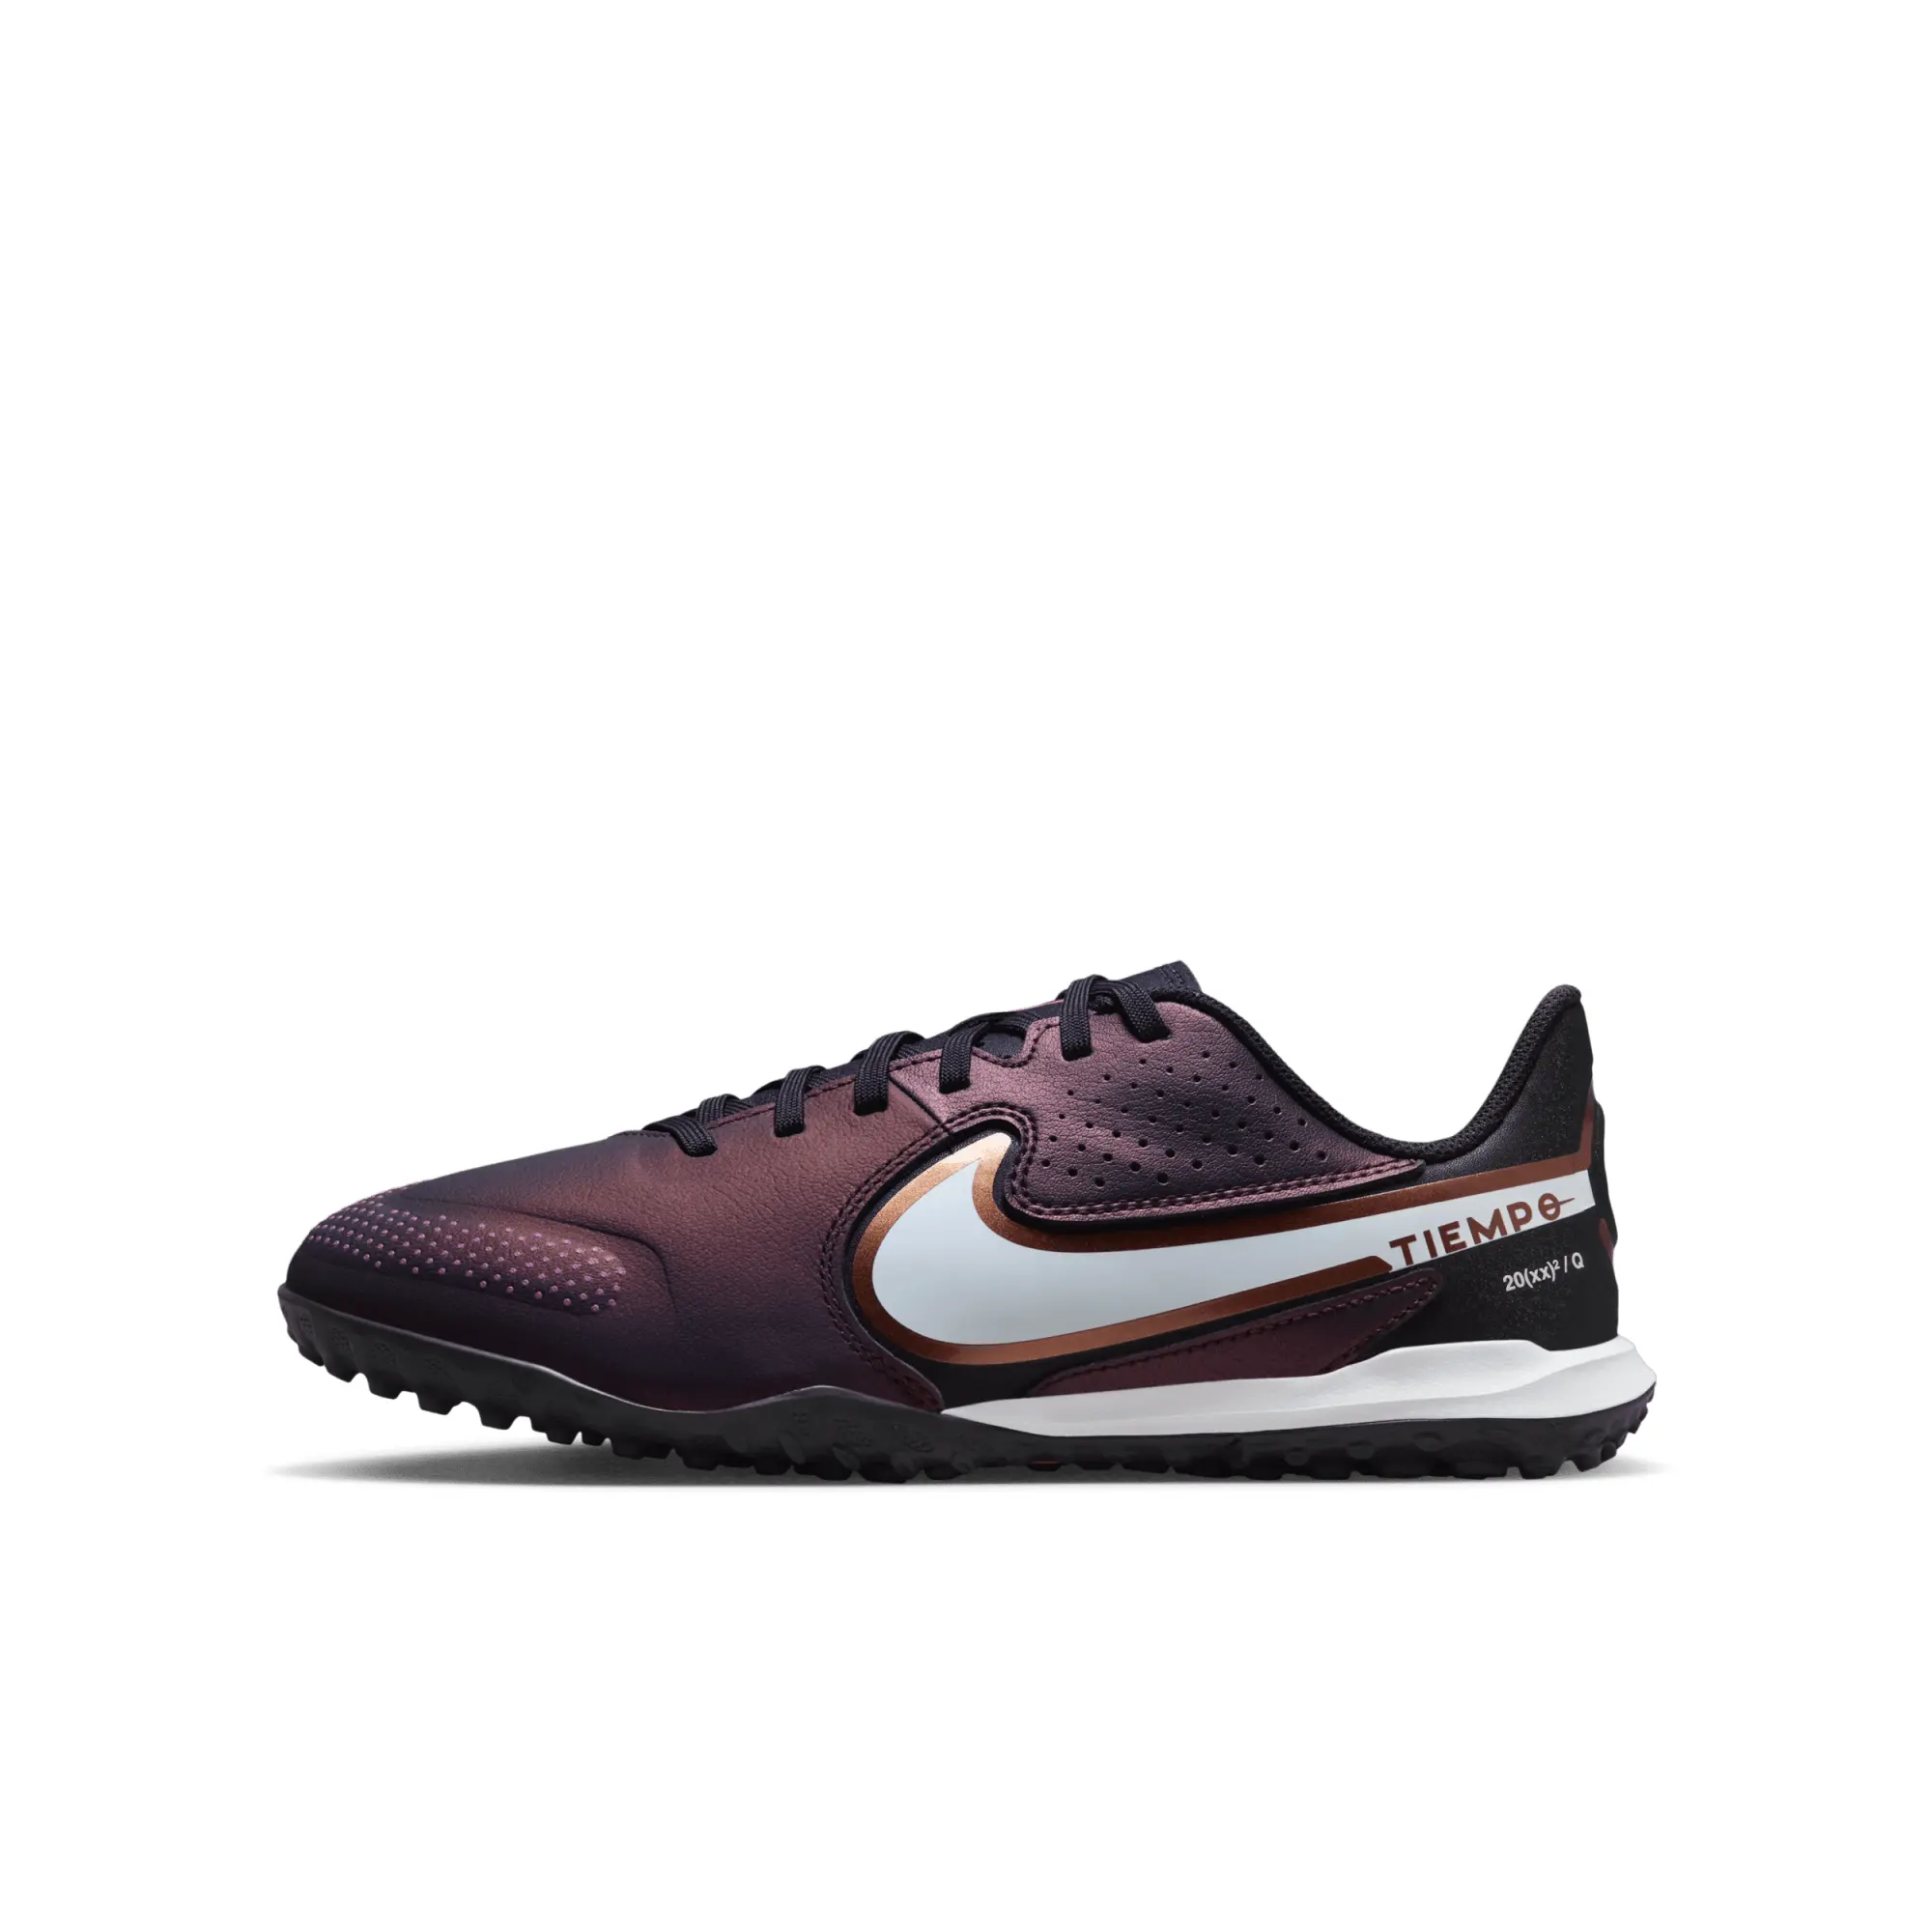 Nike Jr. Tiempo Legend 9 Academy TF Younger/Older Kids' Turf Football Shoes - Purple